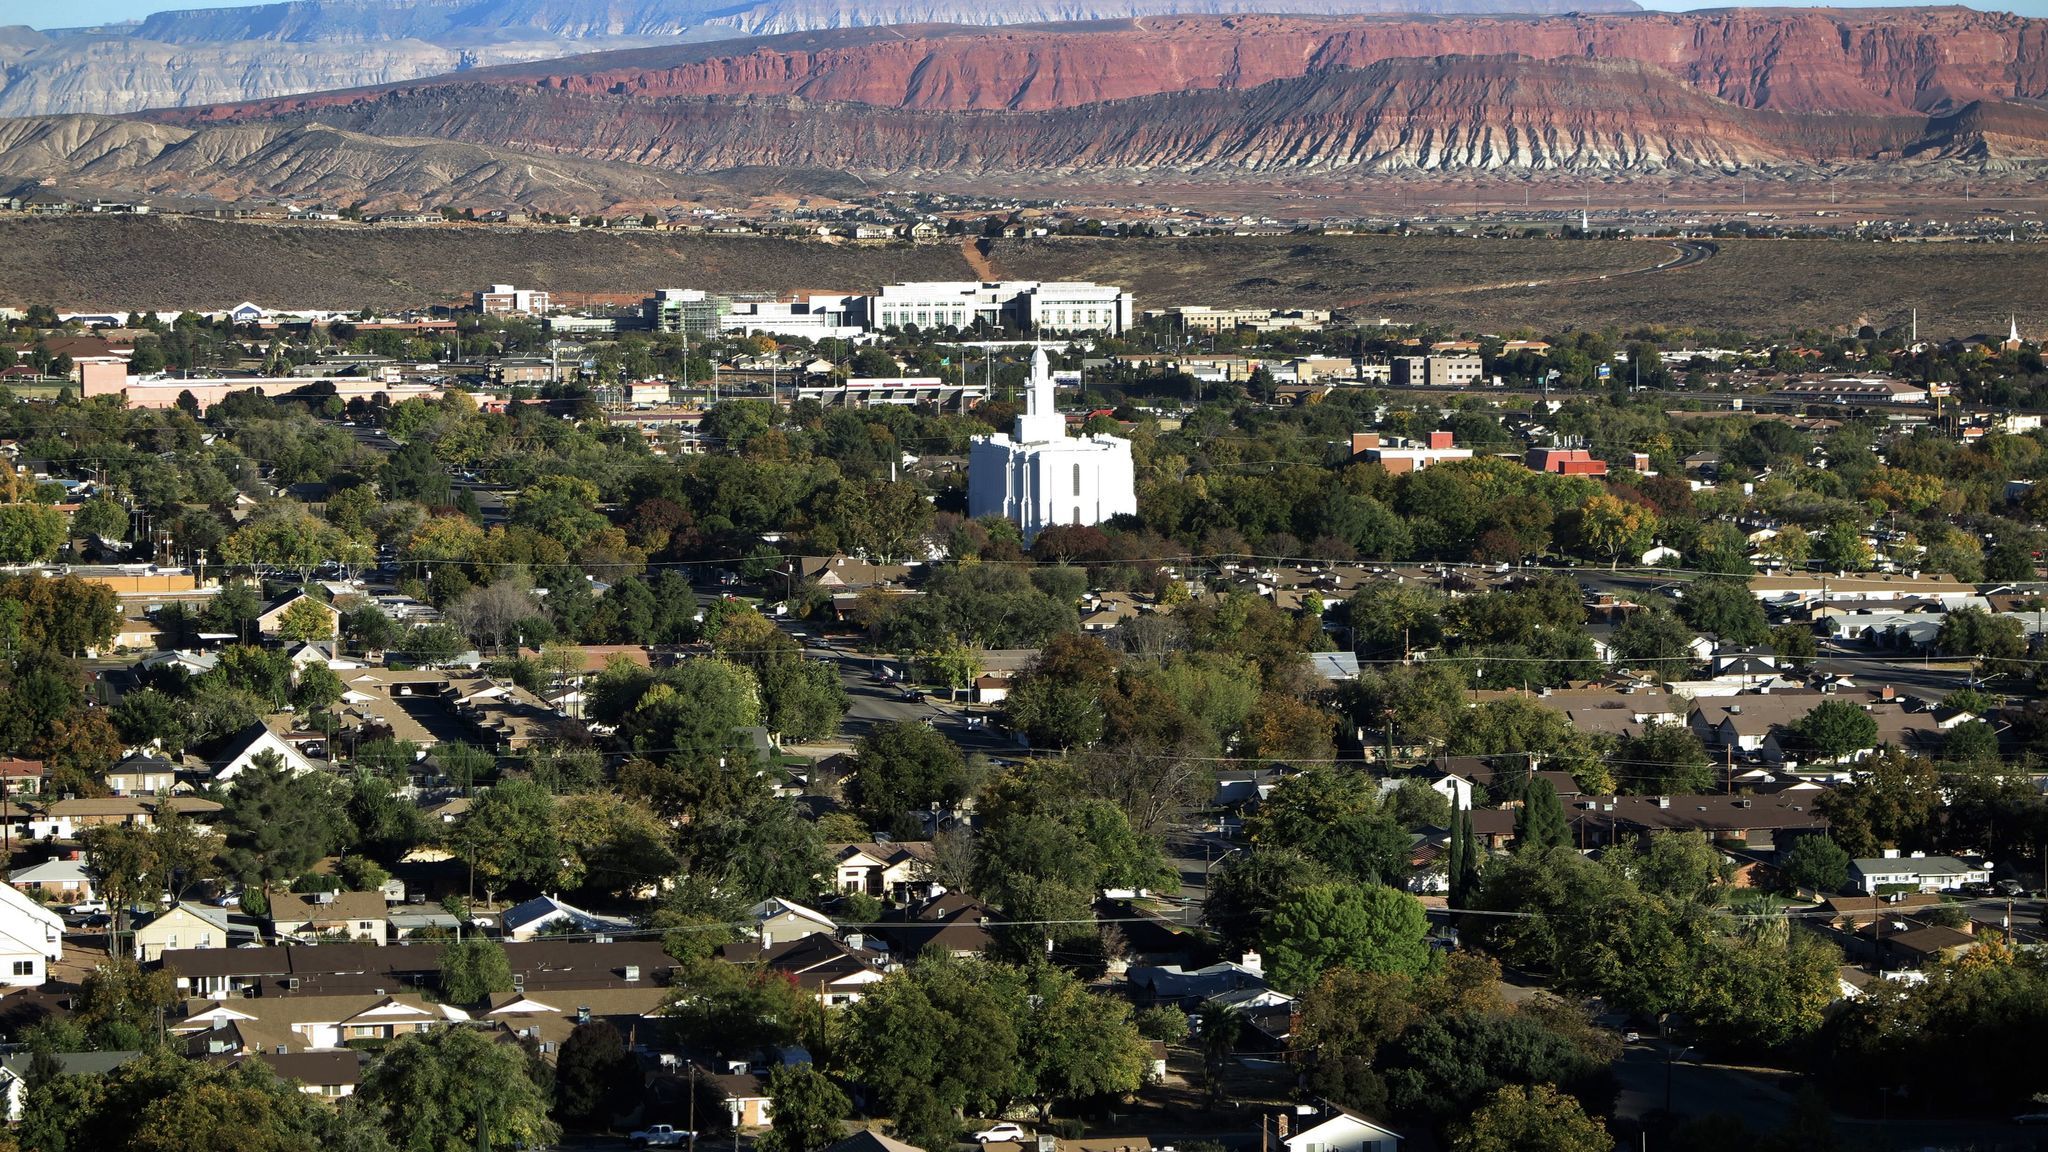 St. George, Utah, is the largest city and county seat of Washington County, one of the country's fastest-growing metropolitan regions